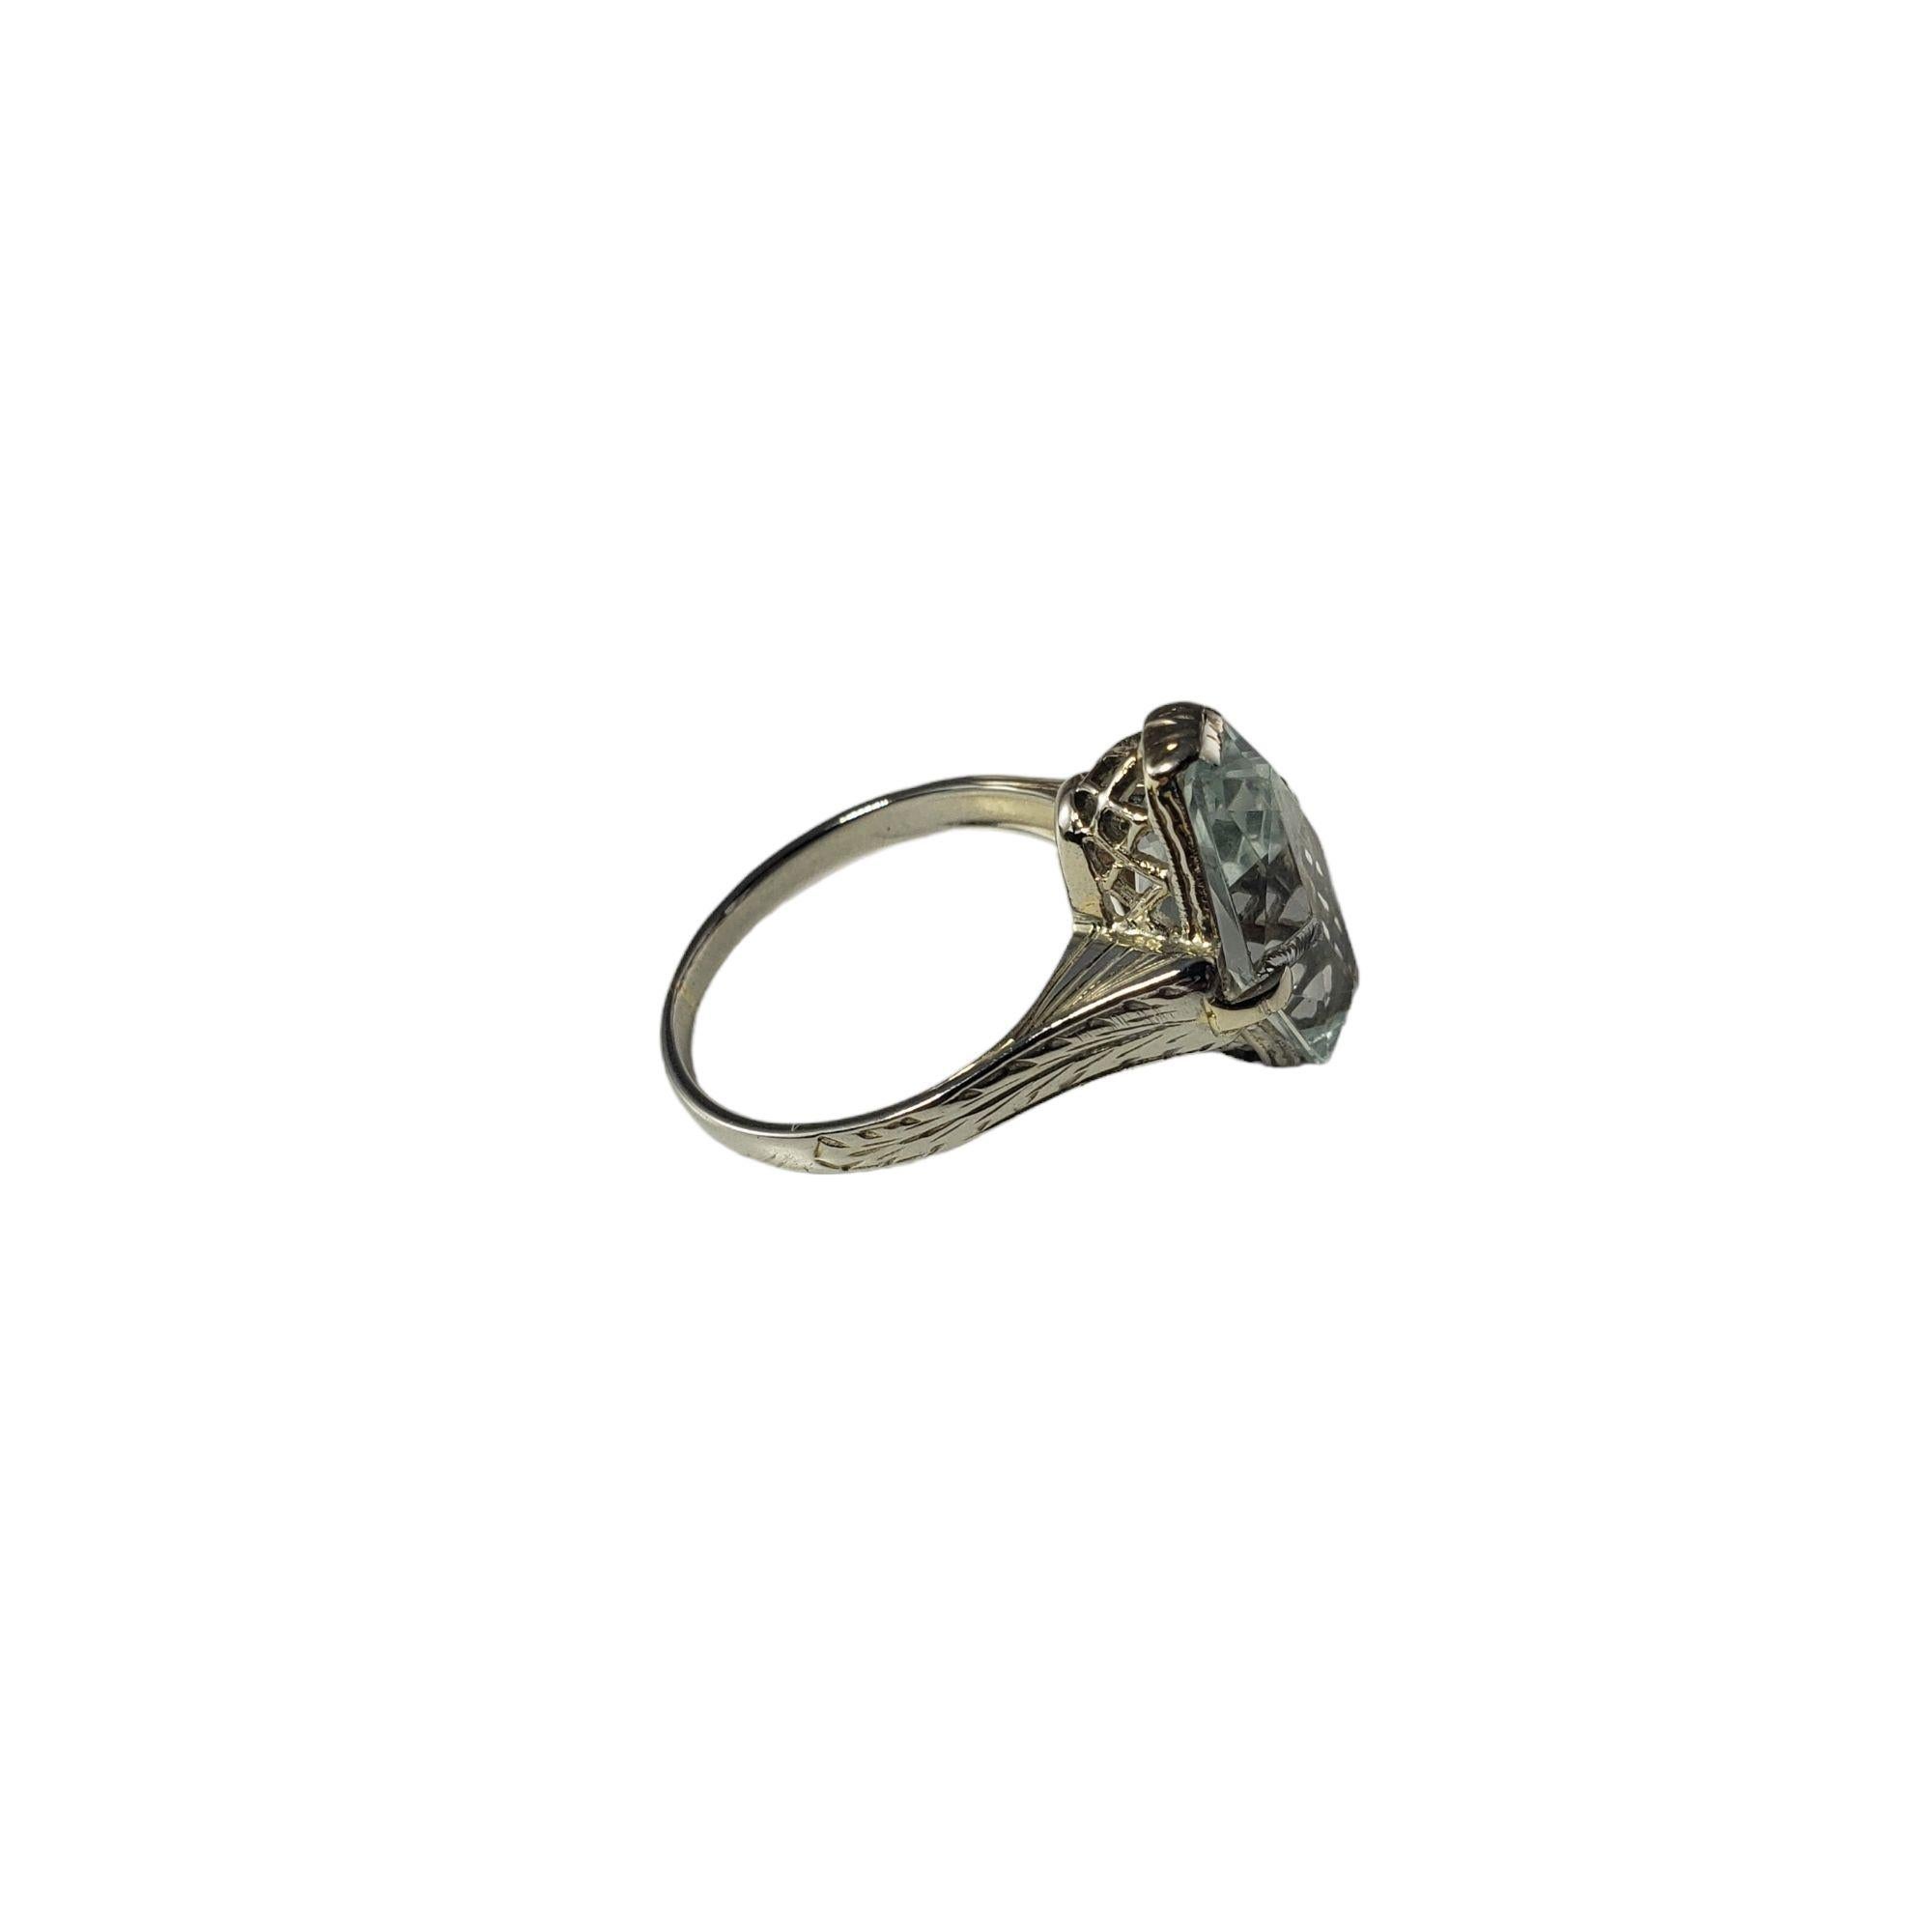 Vintage 14 Karat White Gold Aquamarine Ring Size 4.5 JAGi Certified-

This stunning ring features one aquamarine stone (14.2 mm x 8.4 mm) set in beautifully detailed 14K white gold. Shank: 2 mm.

Aquamarine weight: 2.62 ct.

Ring Size: 4.5

Weight: